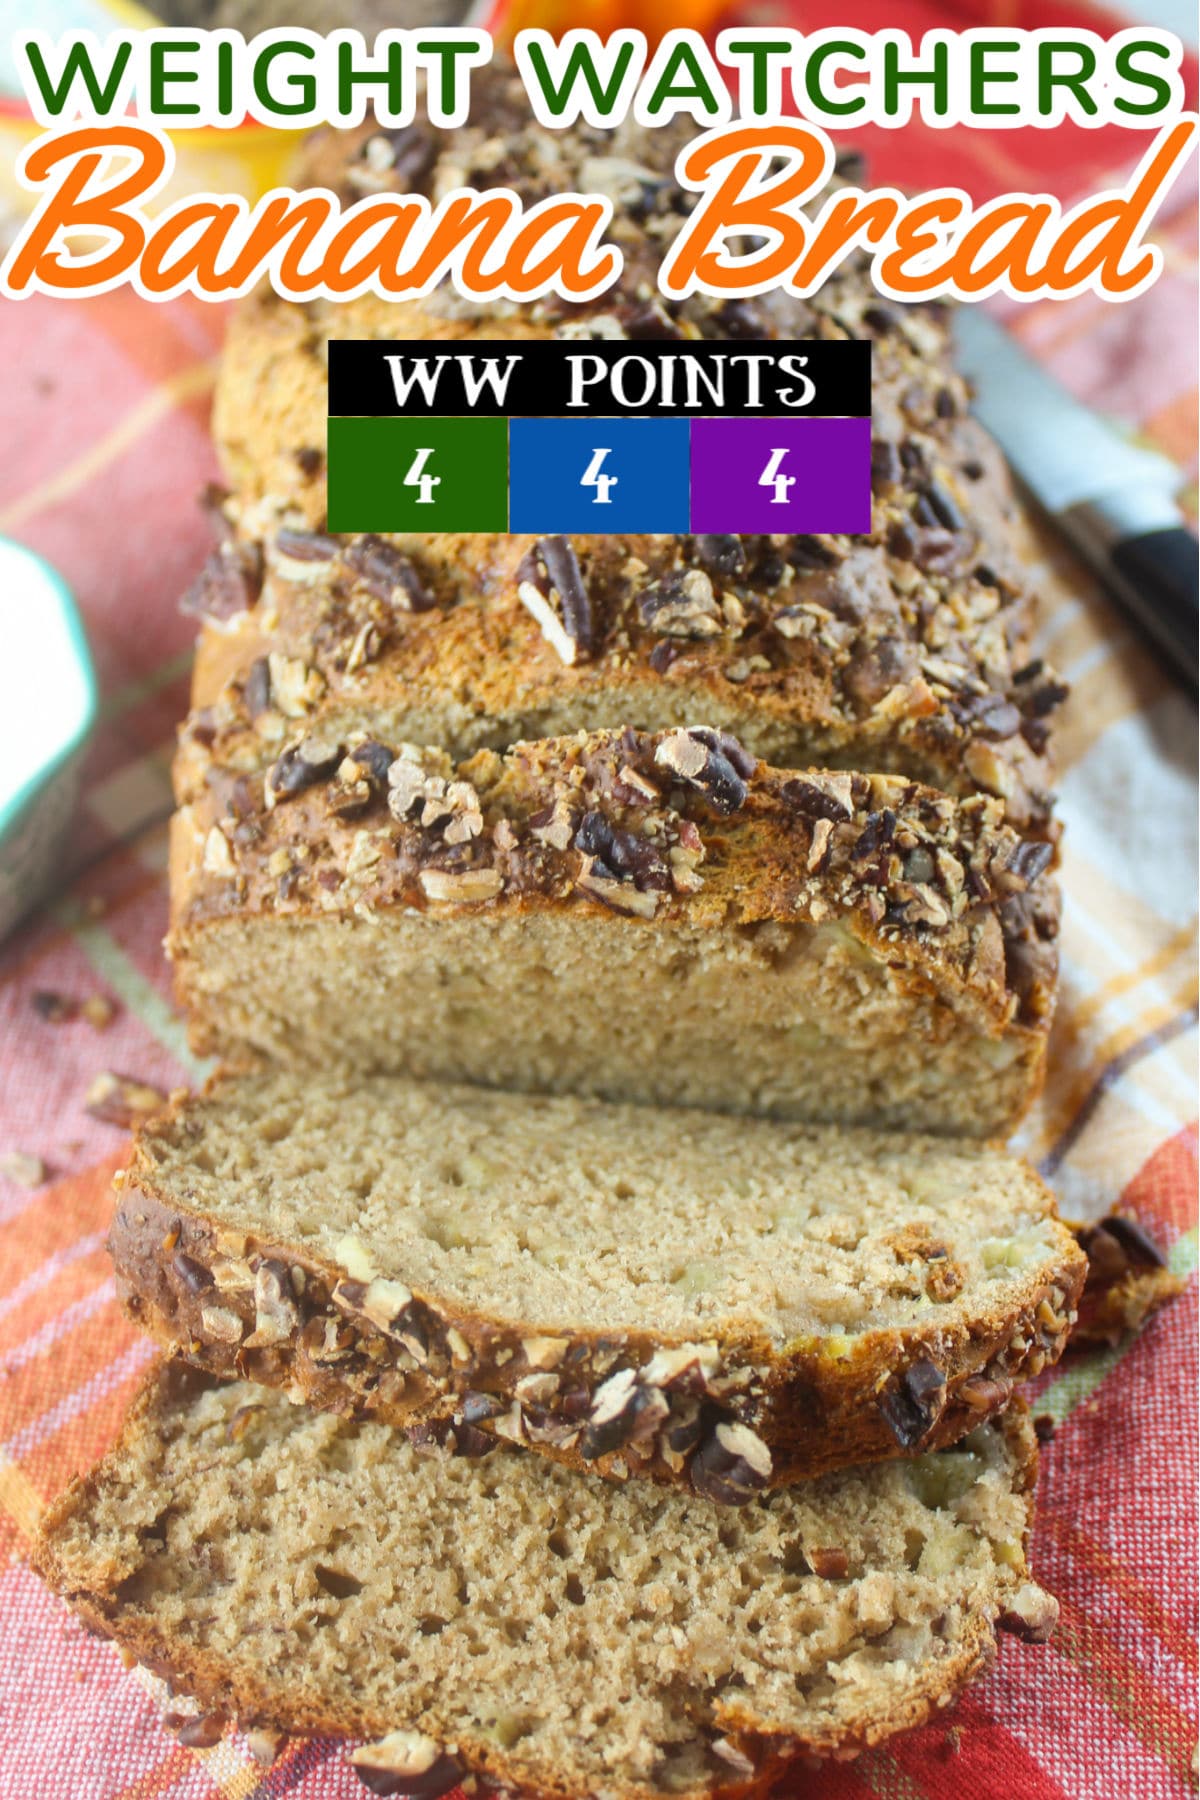 You're going to be shocked when you bite into this Copycat Starbucks Banana Bread and realize it's pretty only 4 Weight Watchers points (all plans)!  via @foodhussy